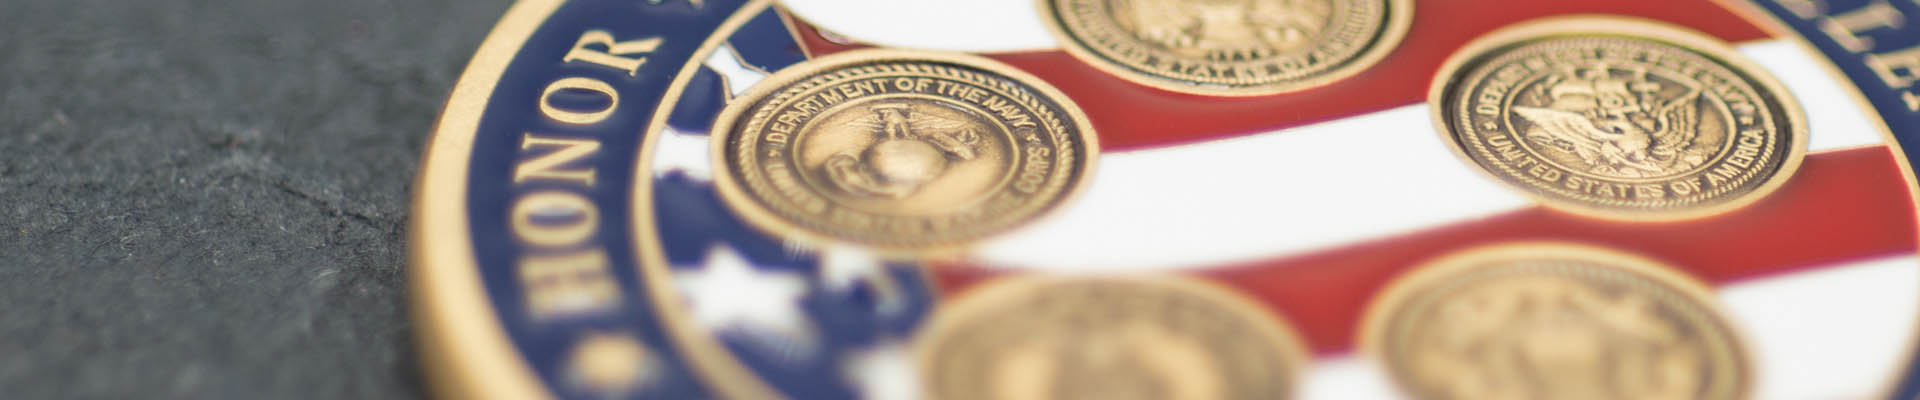 Brass Challenge Coin with American Flag